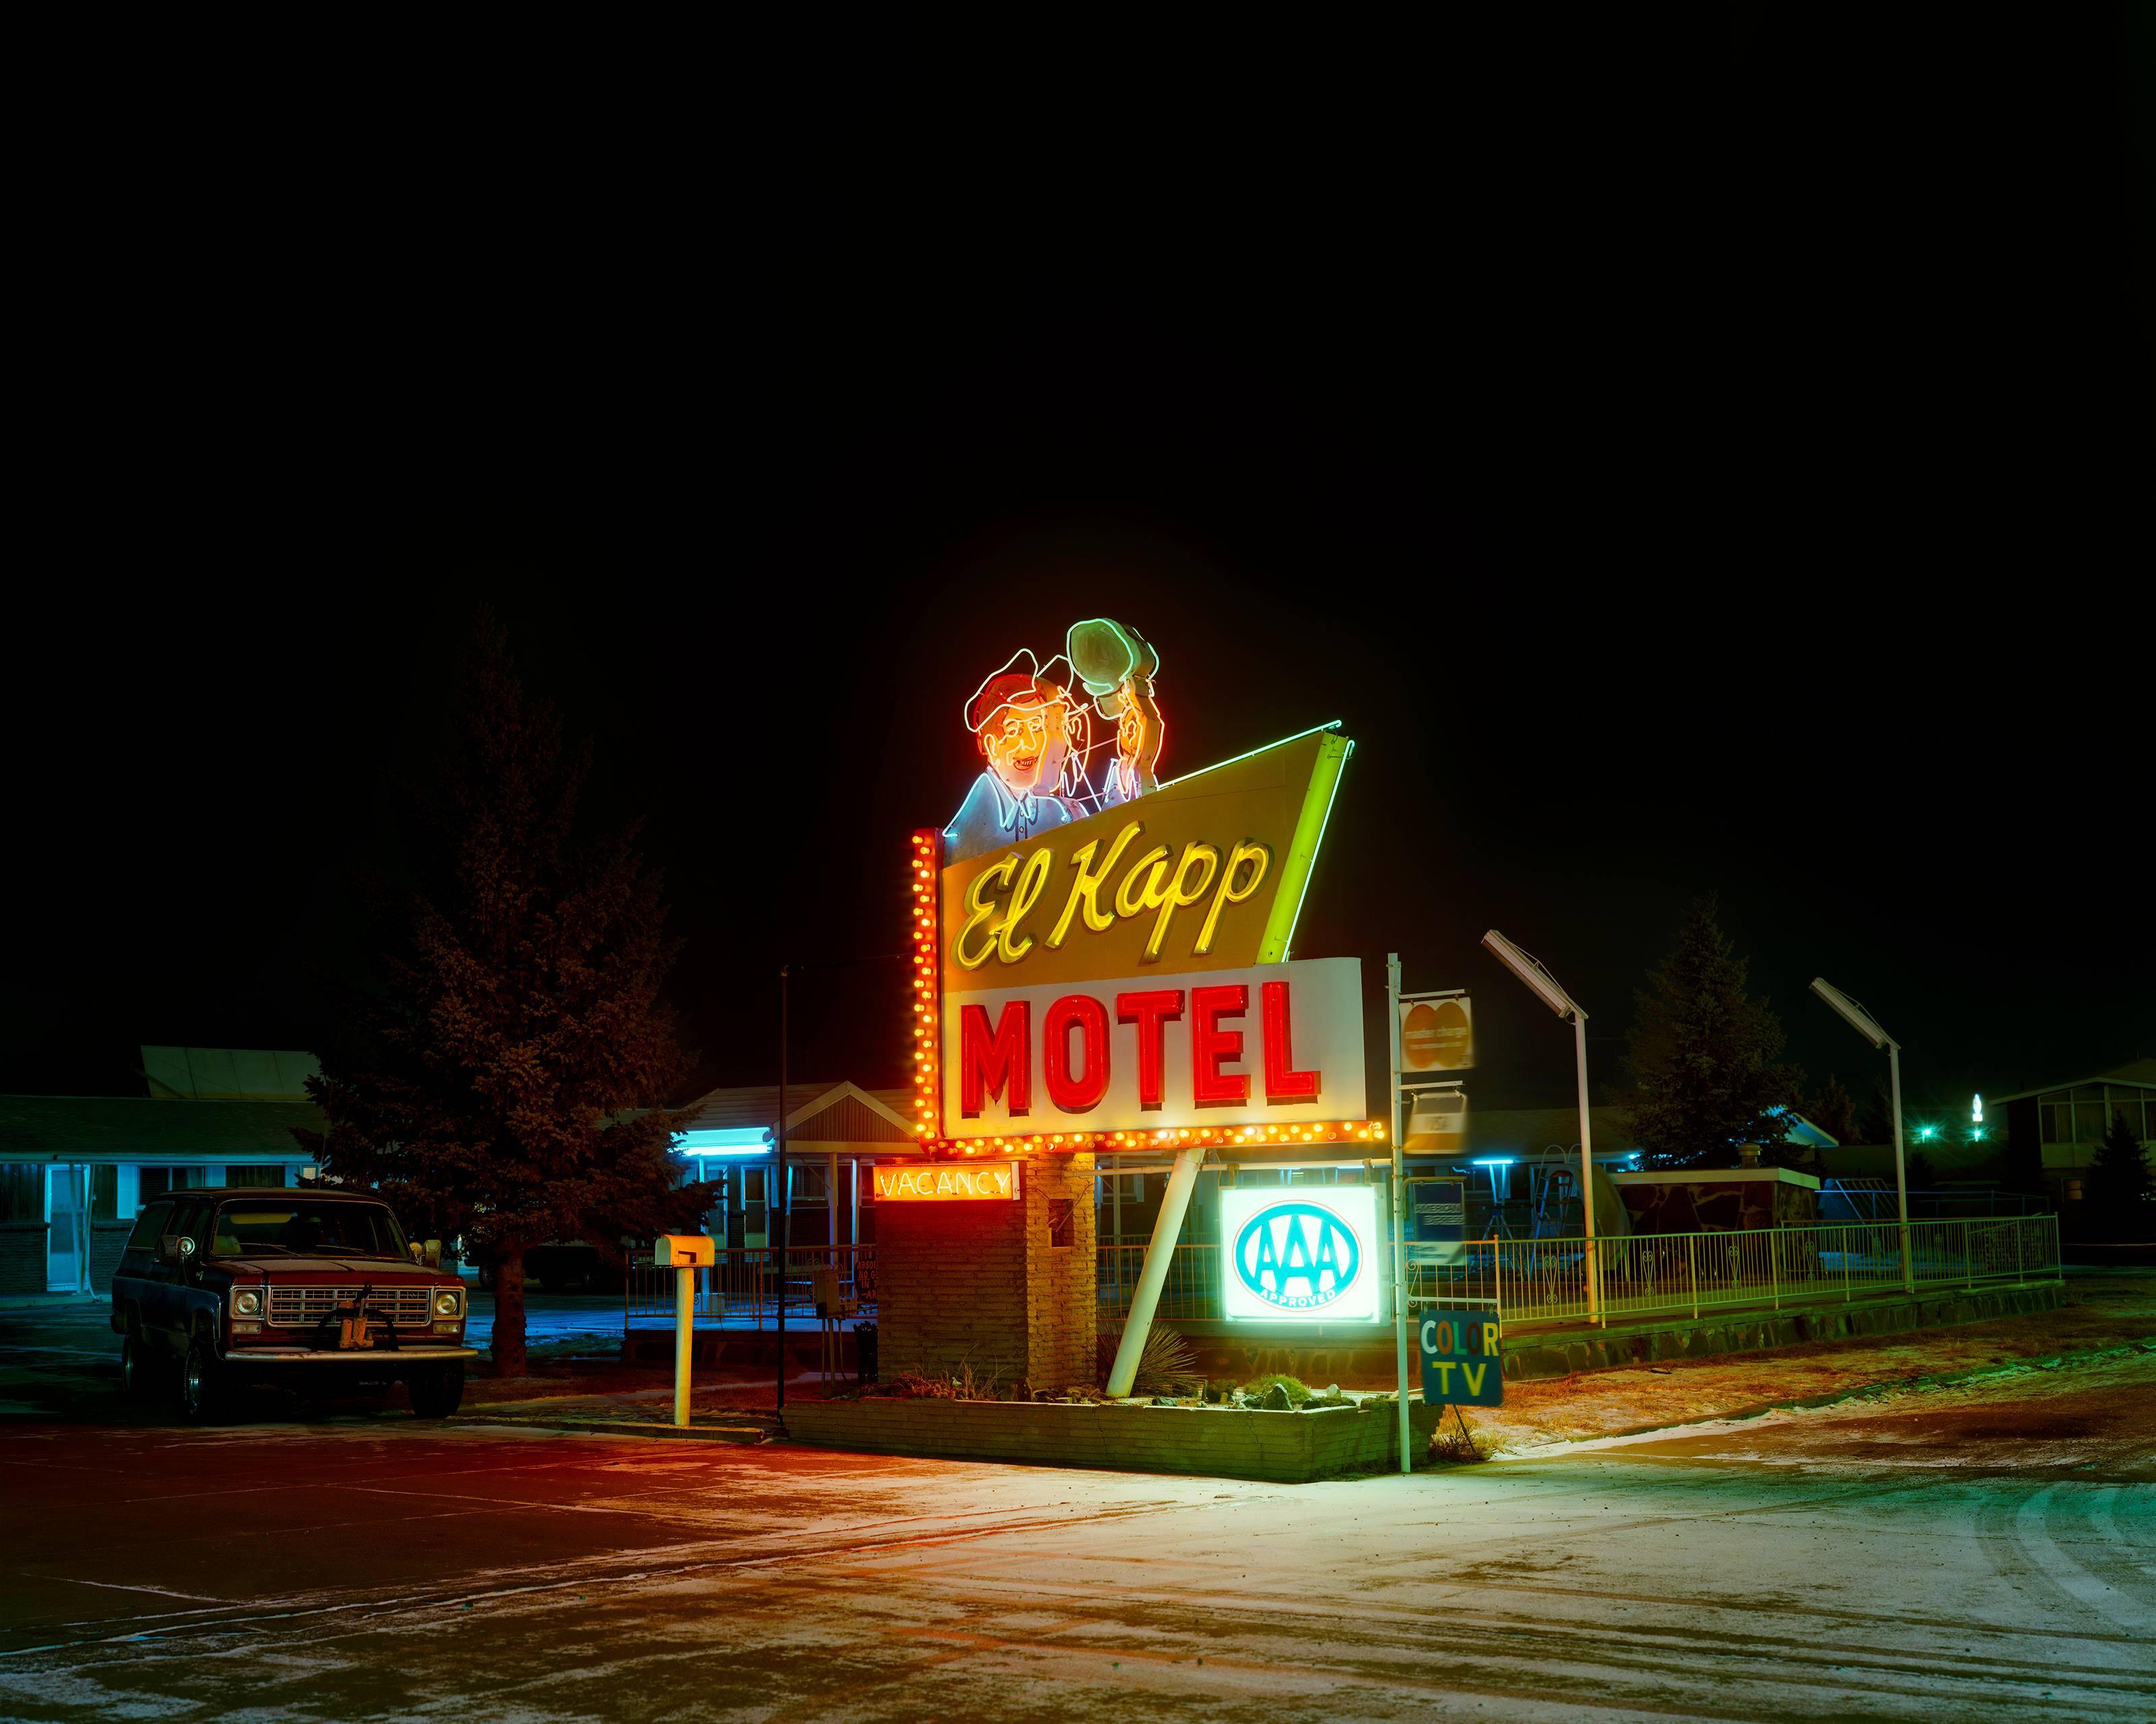 Steve Fitch Color Photograph - El Kapp Motel, Highway 64, Raton, New Mexico; December 19, 1980